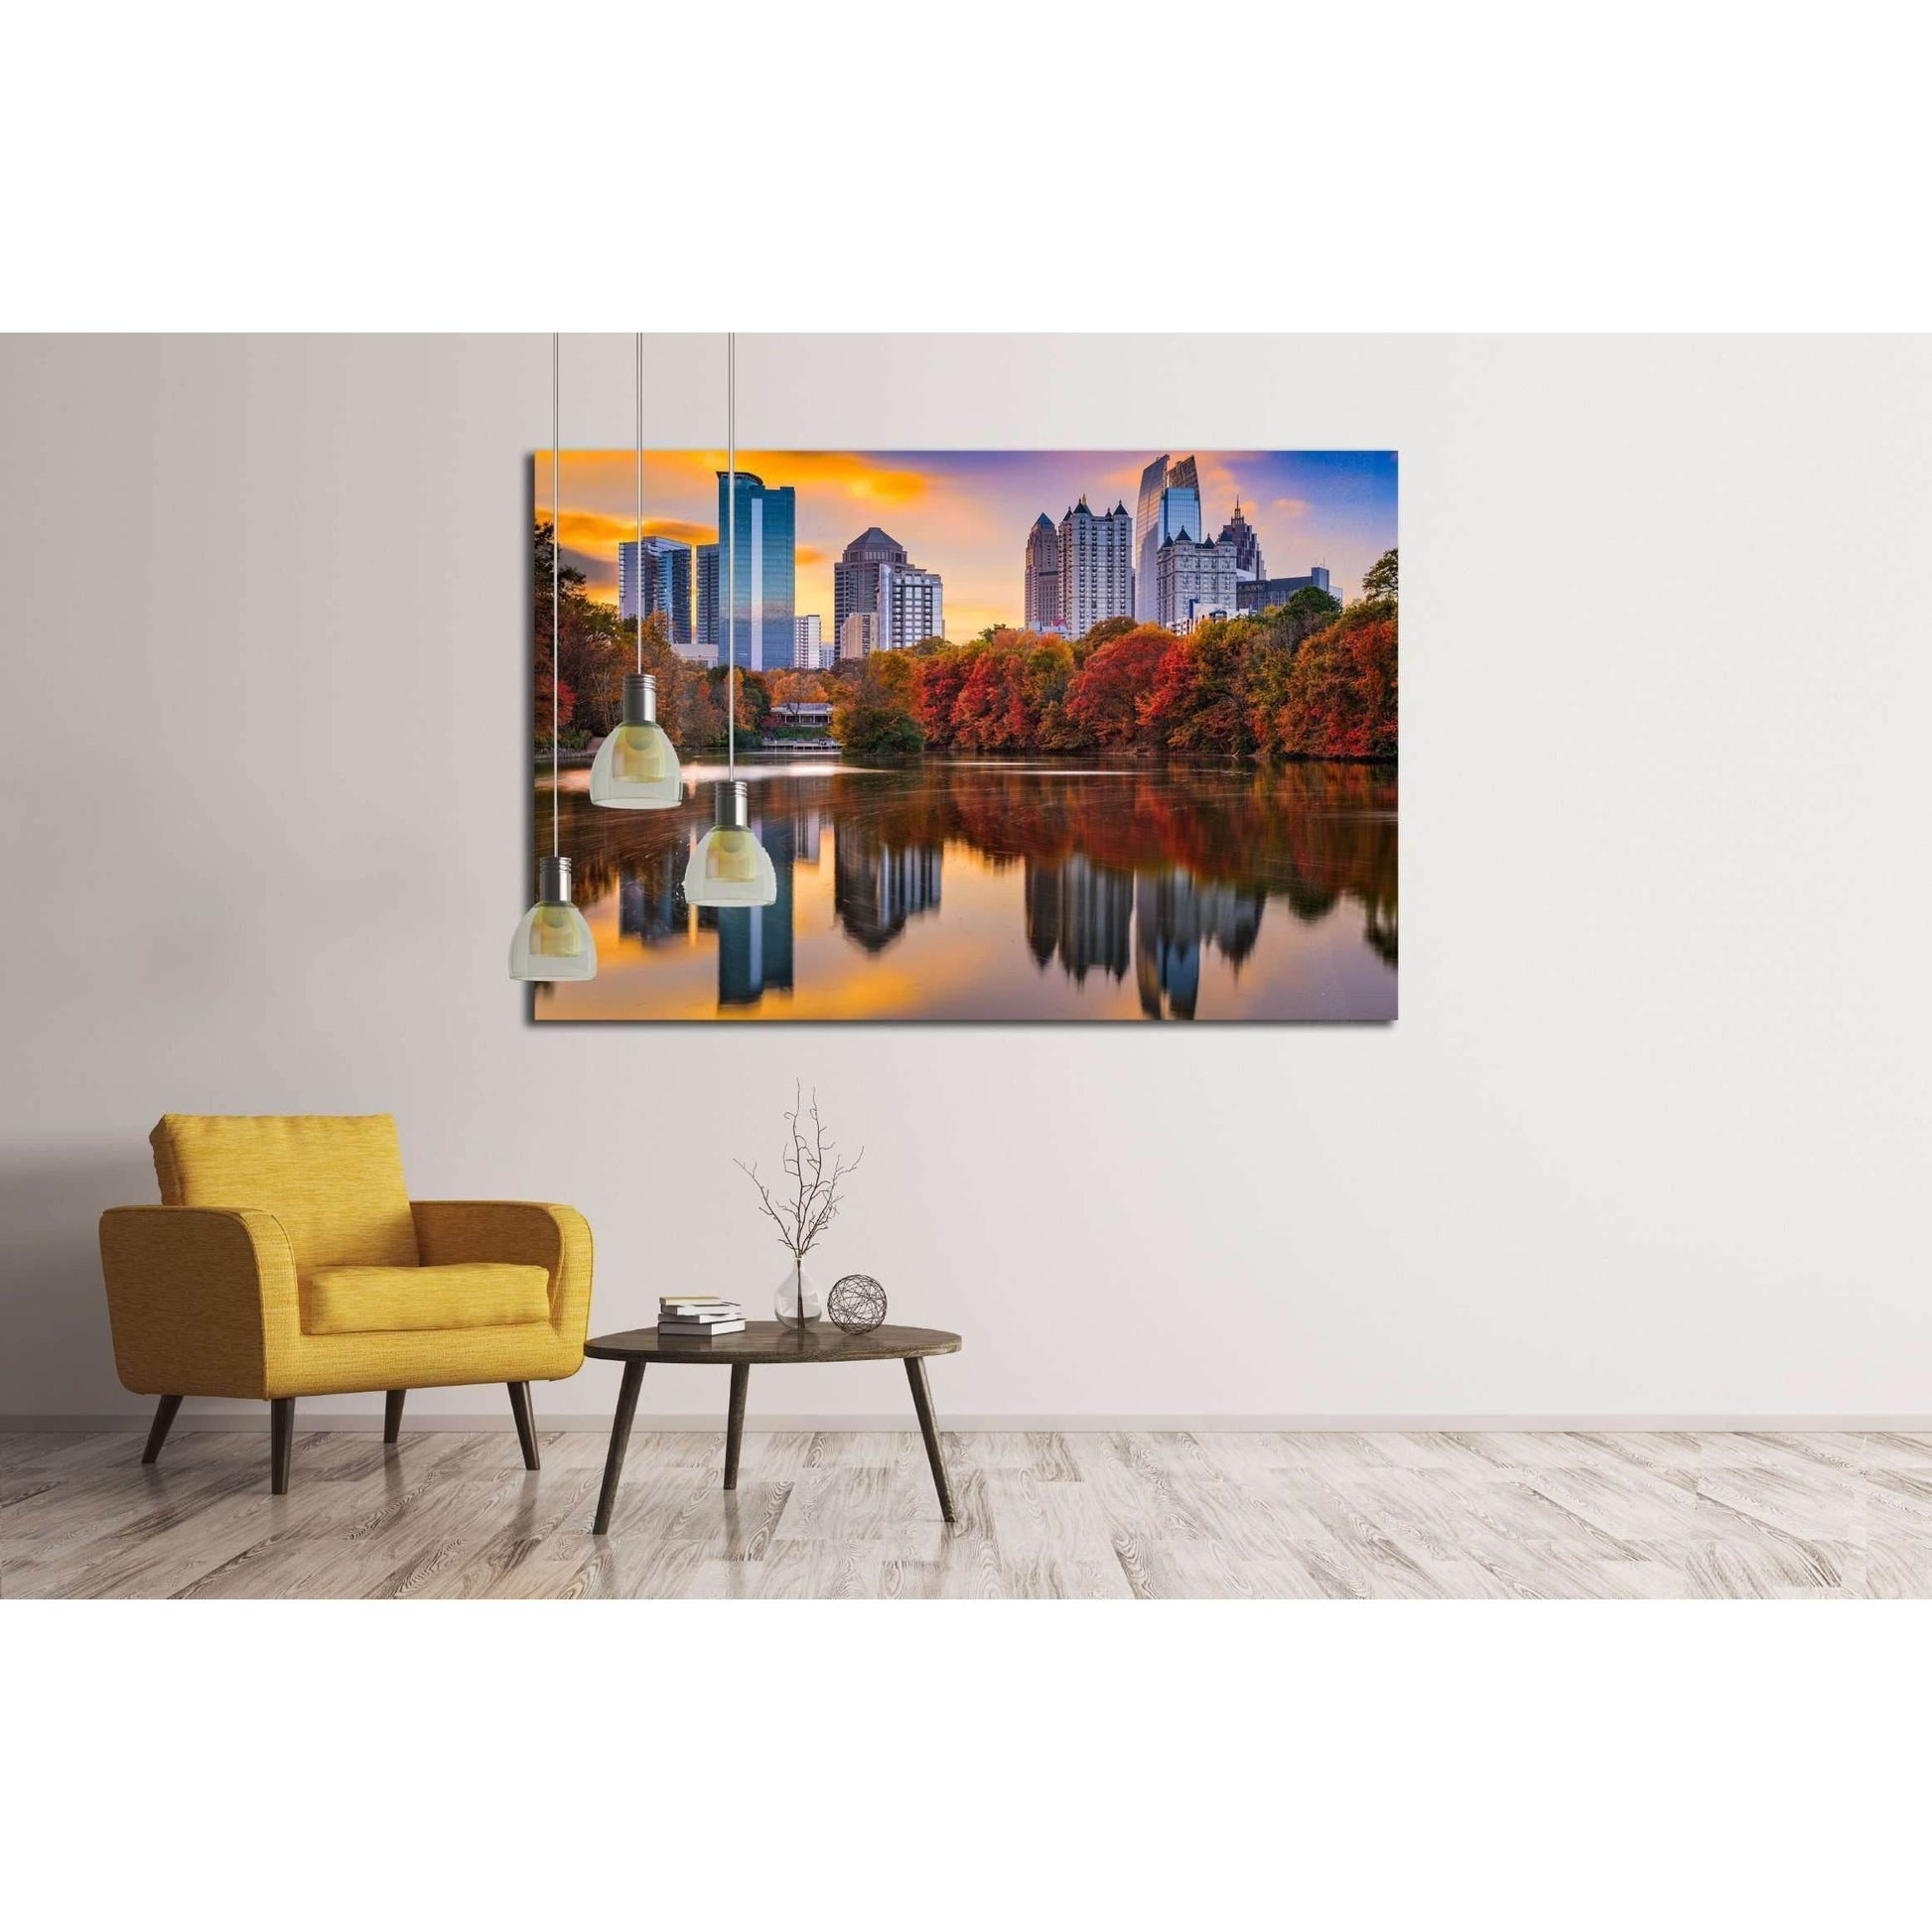 Piedmont Park skyline in autumn Atlanta, GA Canvas PrintThis triptych canvas print captures an urban skyline at sunset, reflected in the calm waters of a city park. The autumnal trees add a warm spectrum of reds and oranges to the scene, complementing the